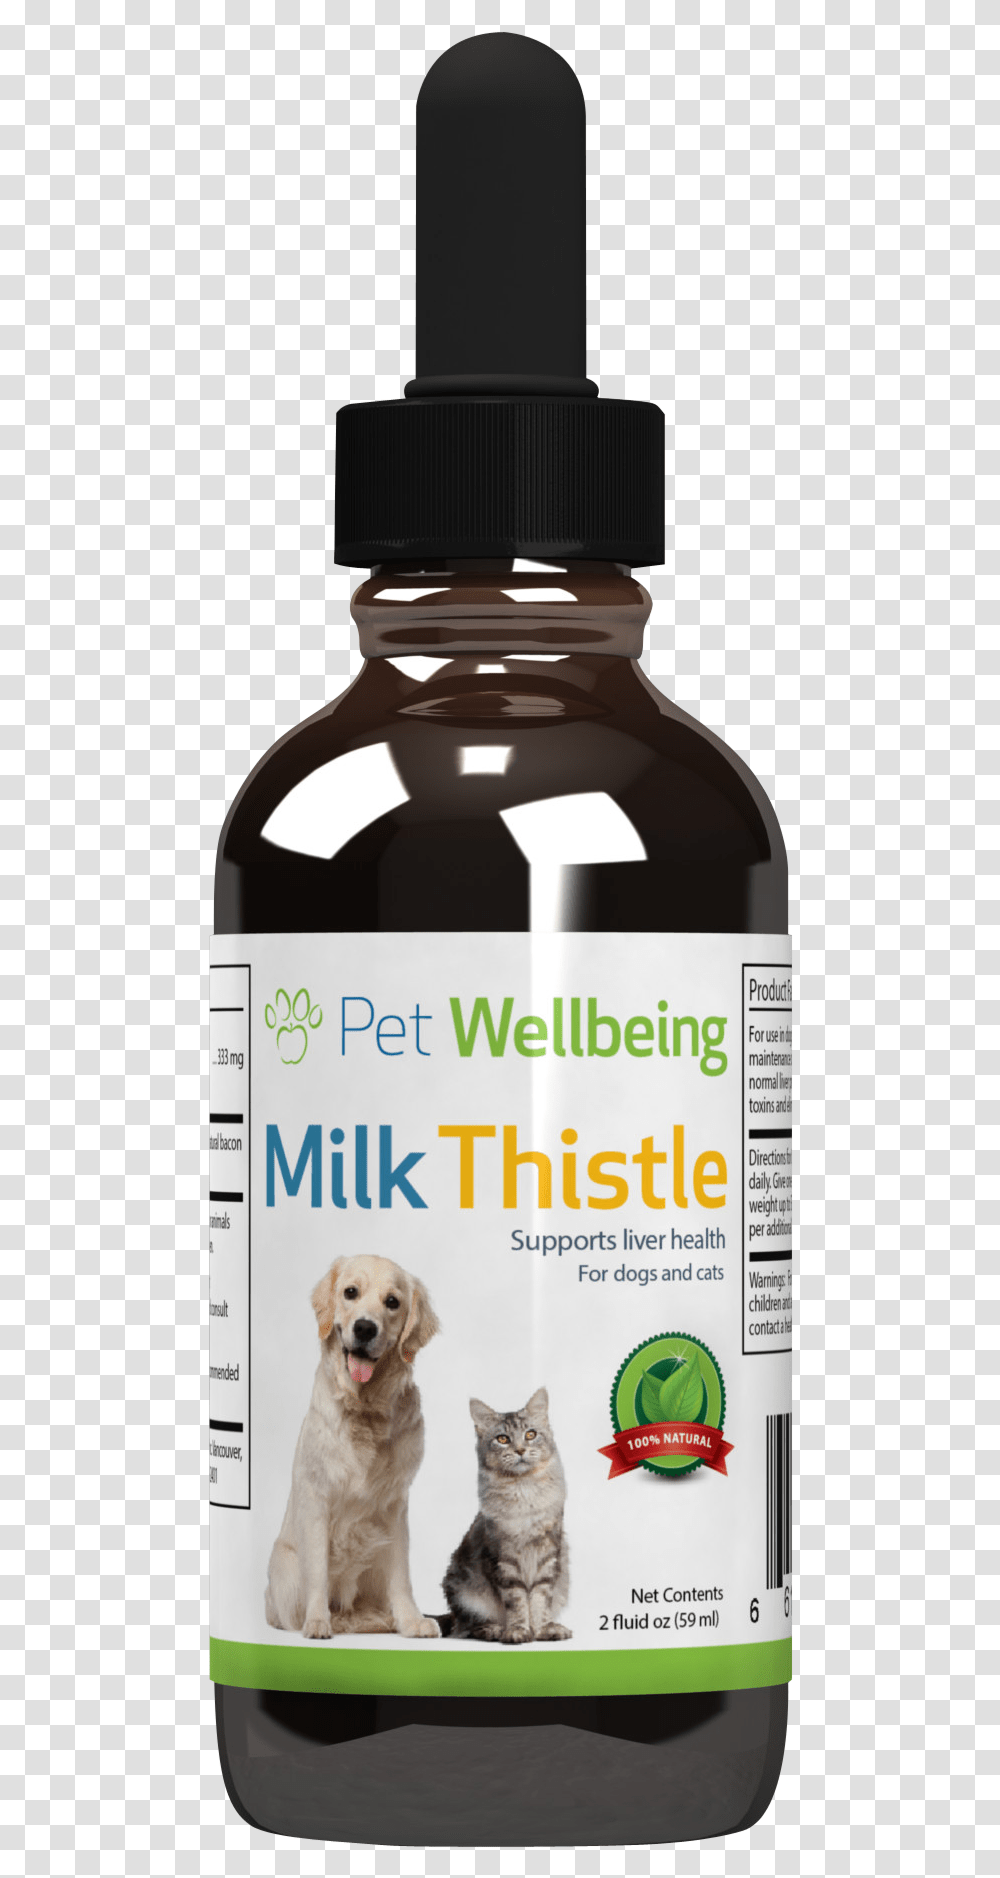 Milk Thistle 2oz For Dogs Amp Cats Petwellbeing Kidney Support Gold, Beverage, Bottle, Alcohol, Label Transparent Png